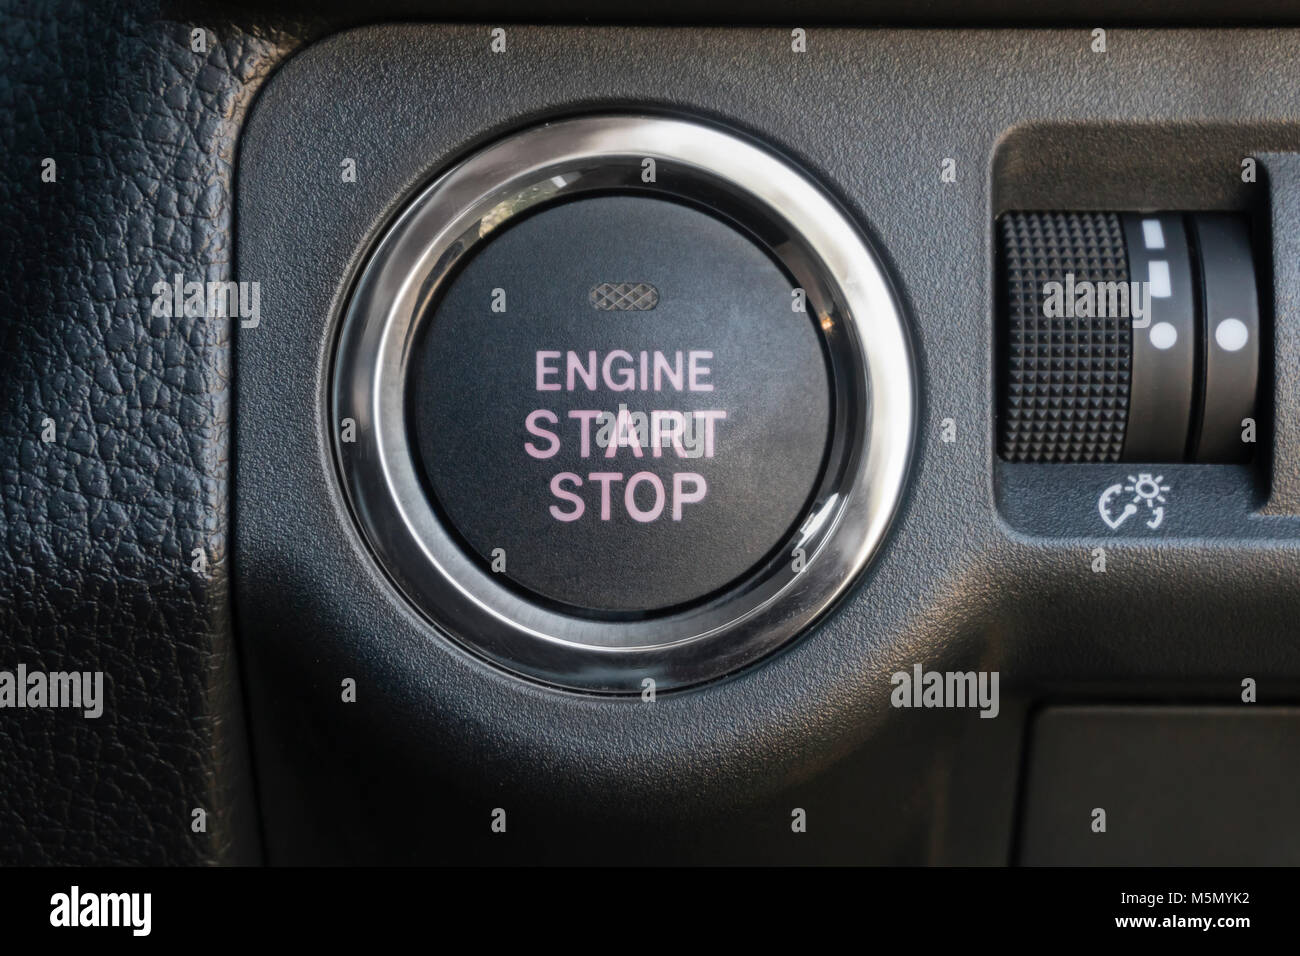 Engine start stop button of a car Stock Photo